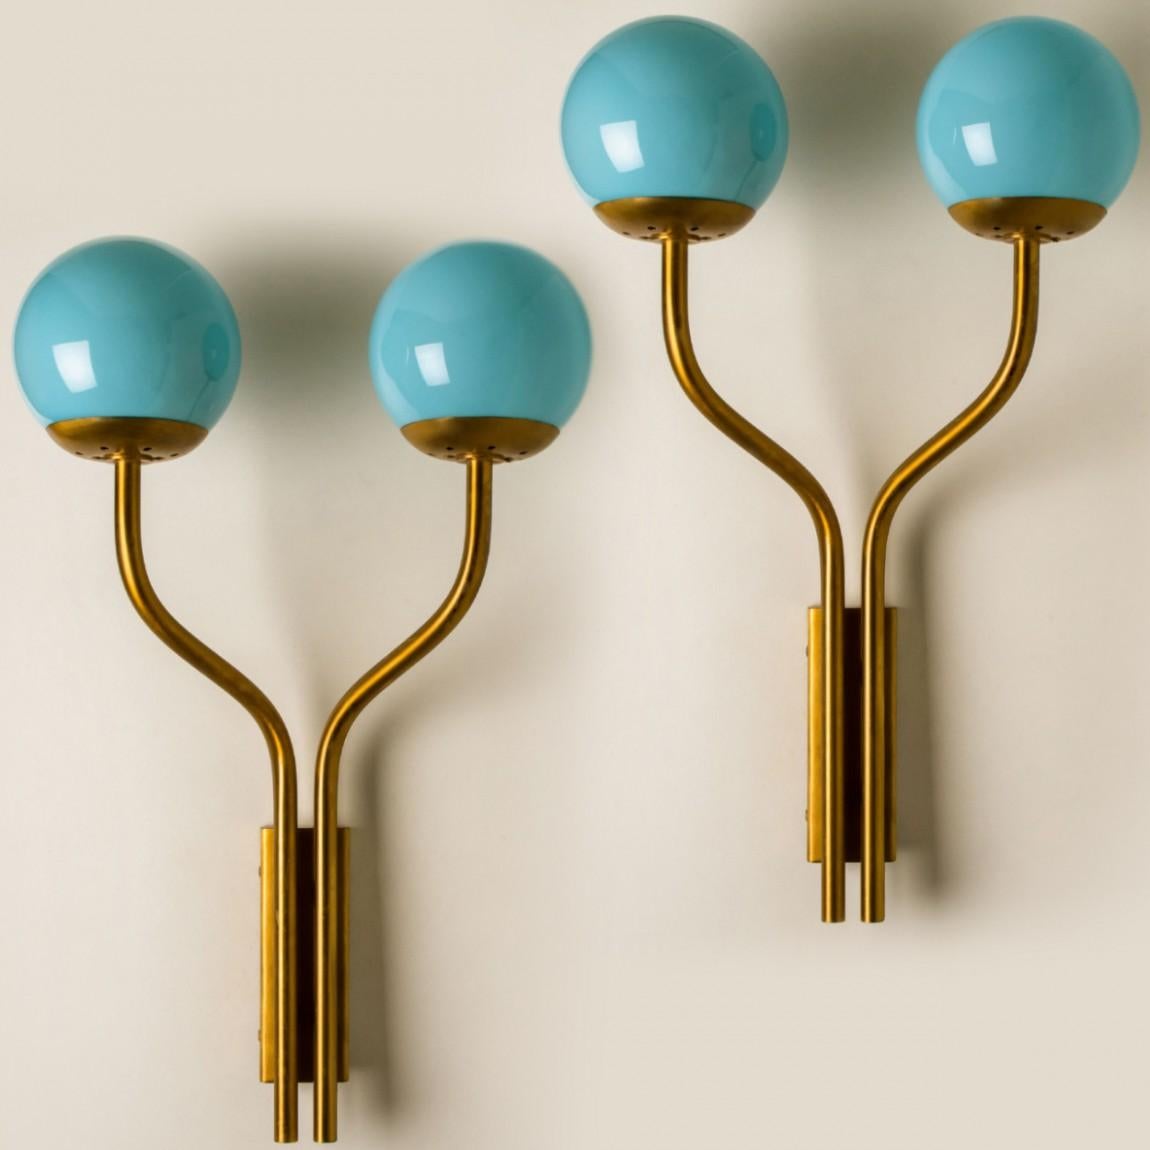 Playful blue wall lights, in the style of Stilnovo, made in Italy, around 1960. The wall lights are made of a brass frame with two arms holding a blue glass ball. When the lights are on, they give a warm light. As shown in the